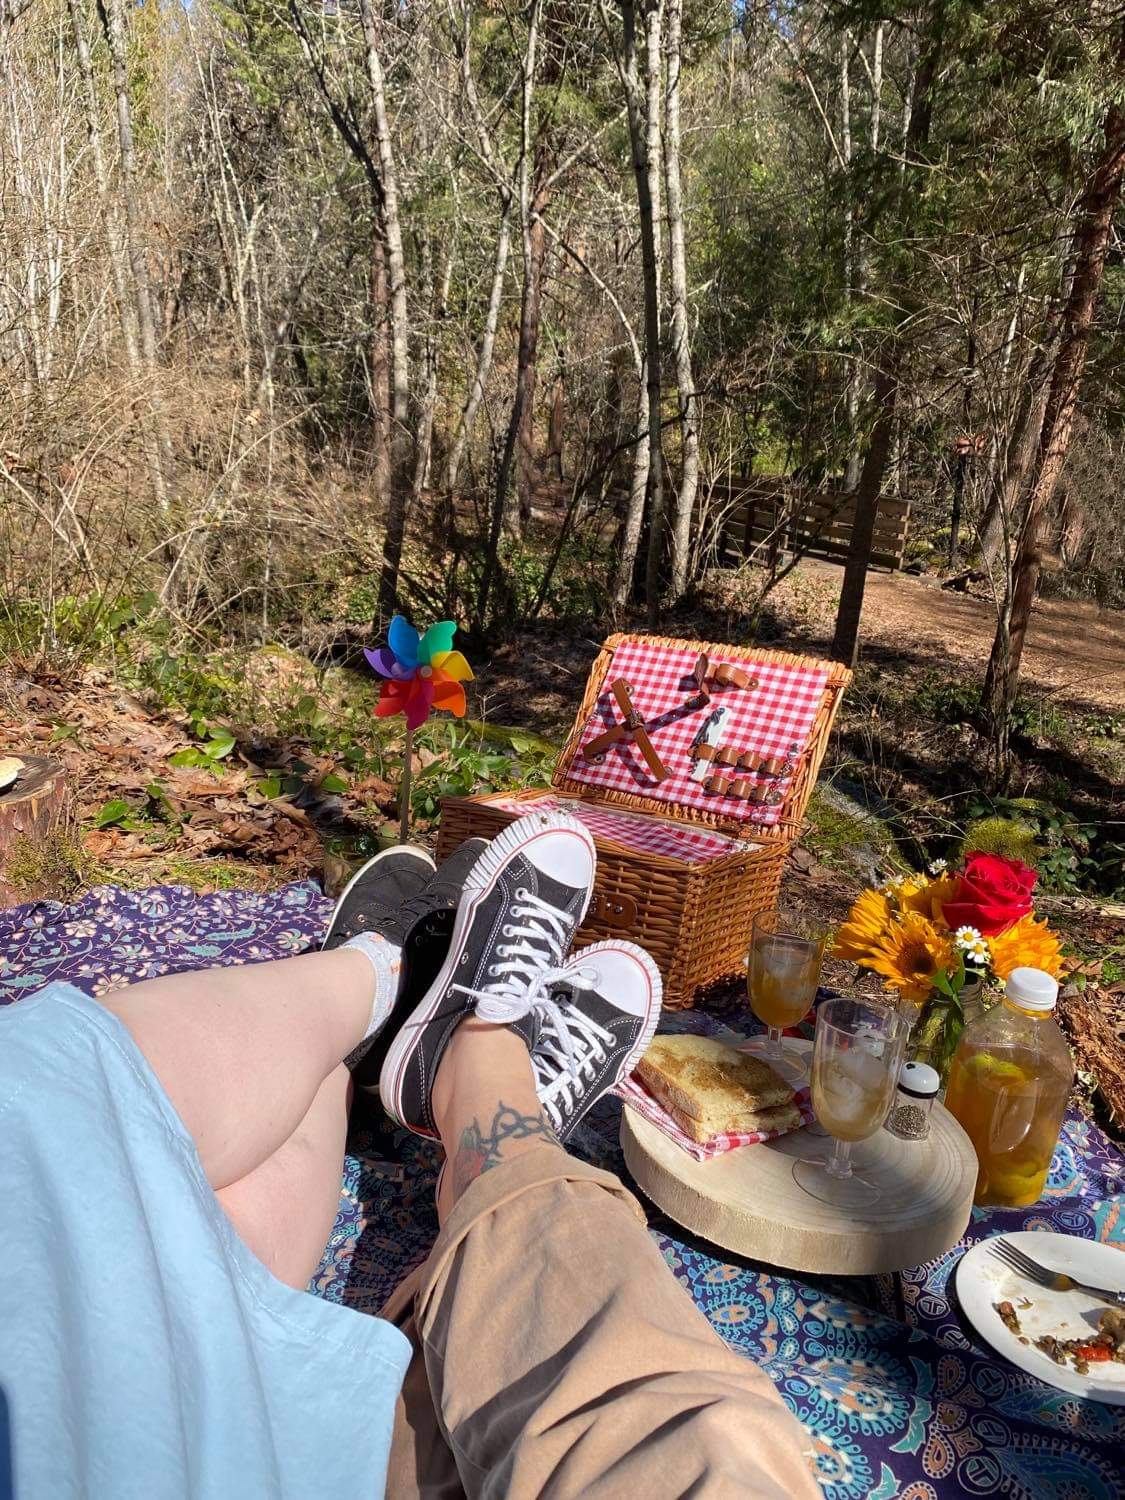 My girlfriend and went on a picnic and it was glorious. And if it wasn't gay enough we brought a rainboe pinwheel. 🏳️‍🌈